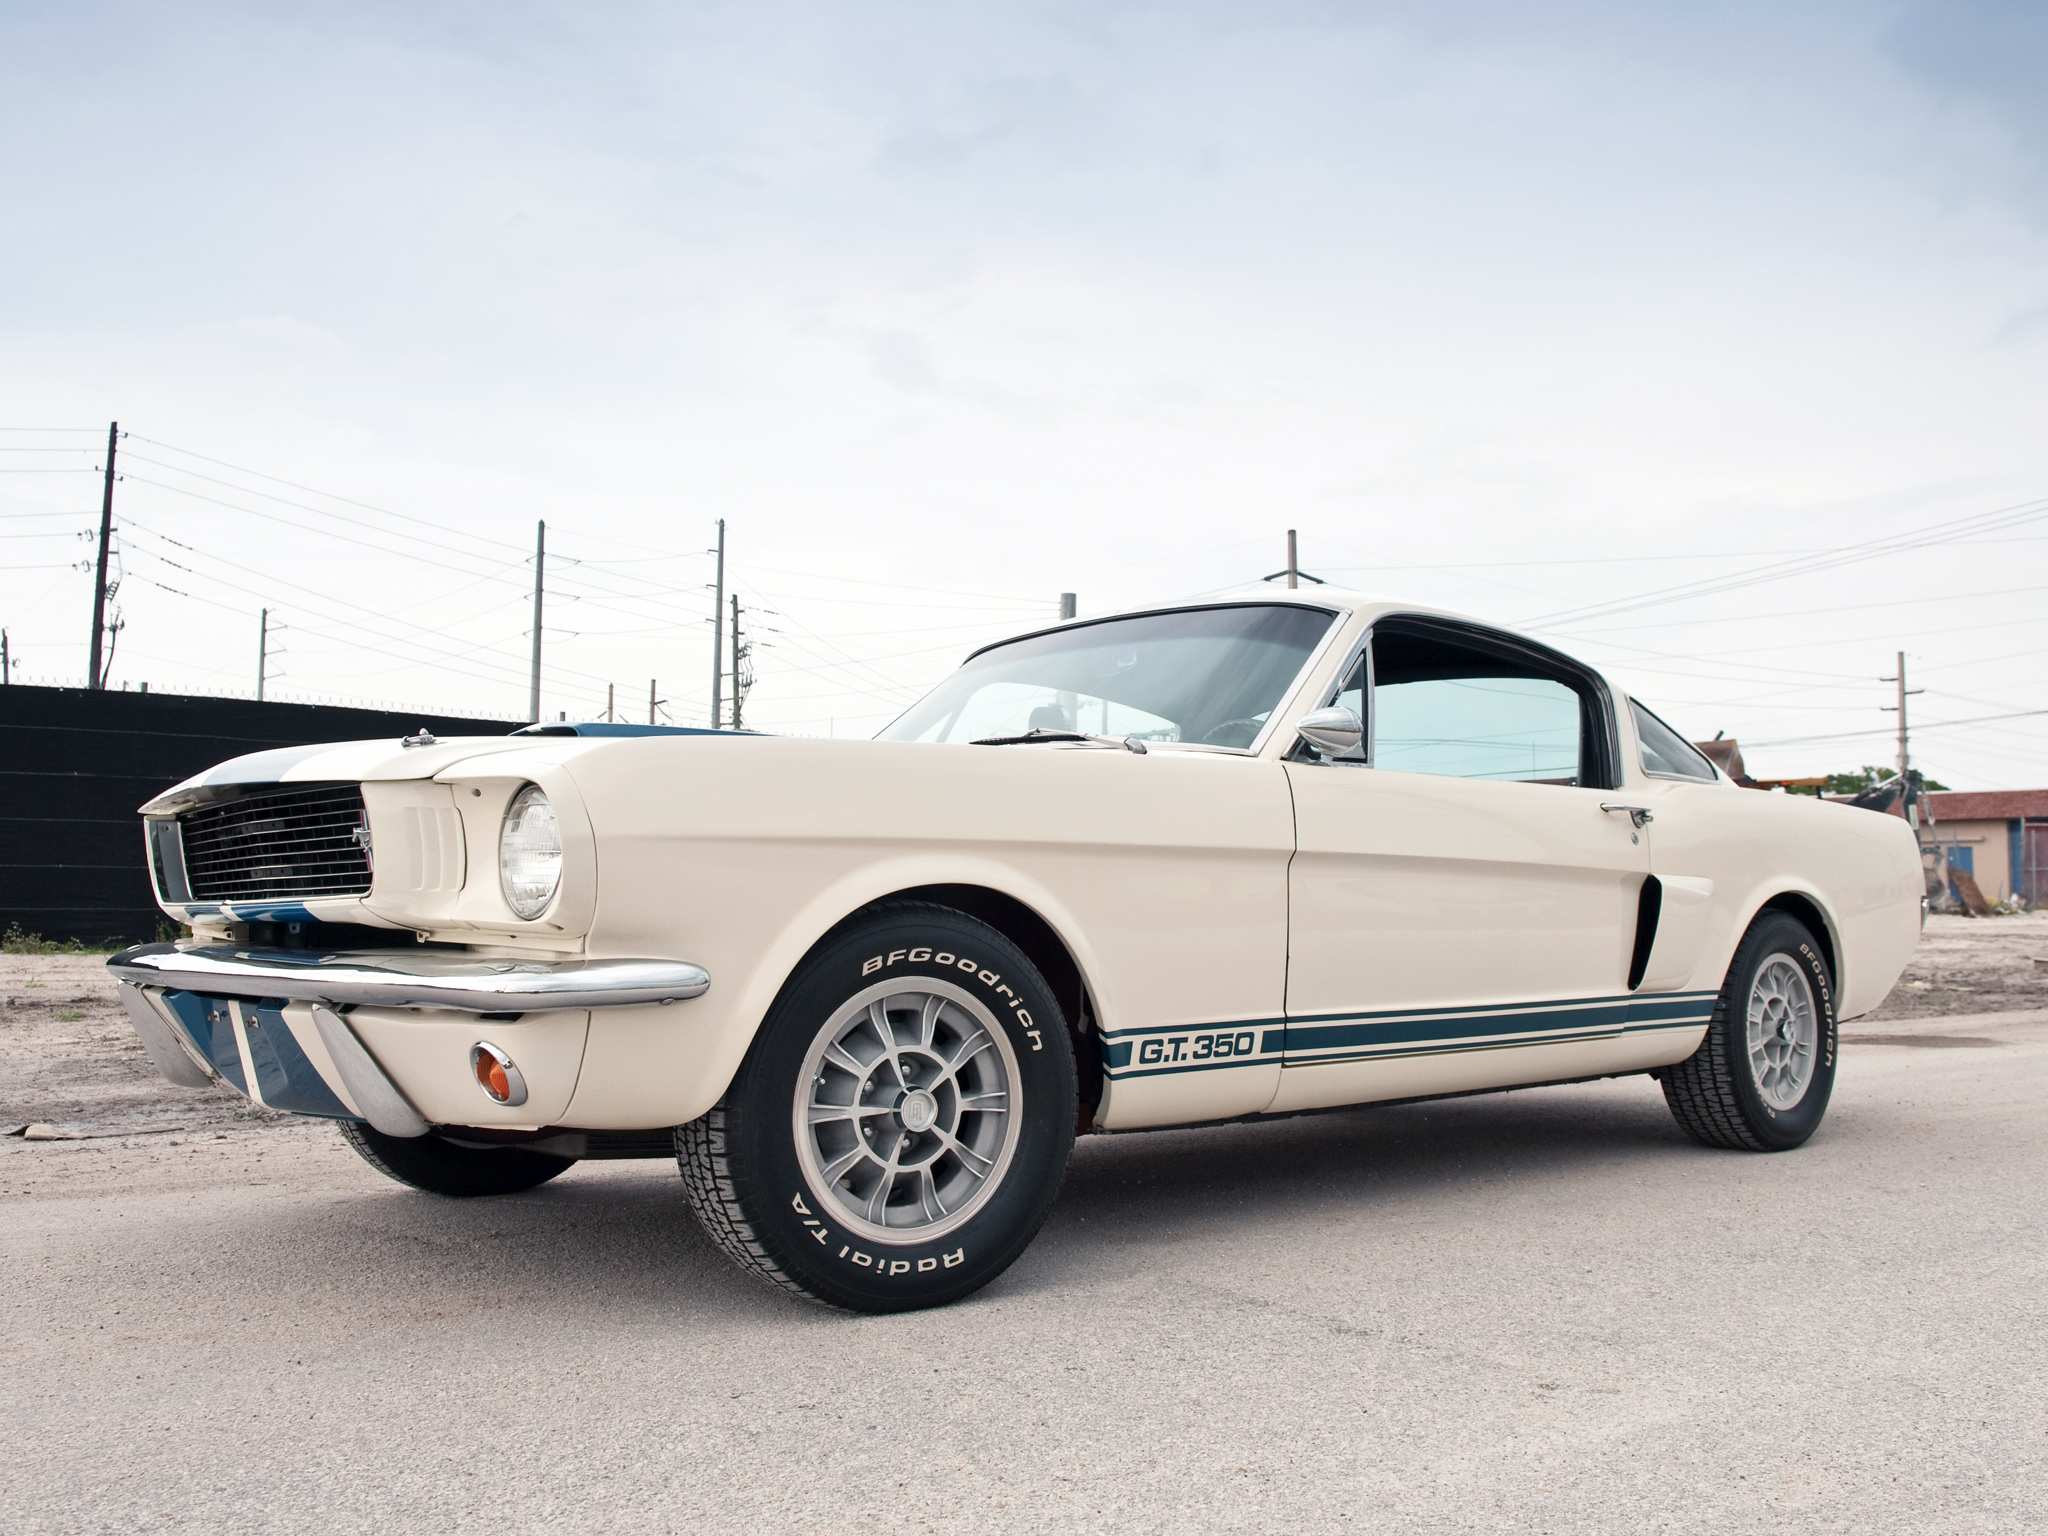 1966, Shelby, Gt350, Ford, Mustang, Classic, Mustang Wallpaper